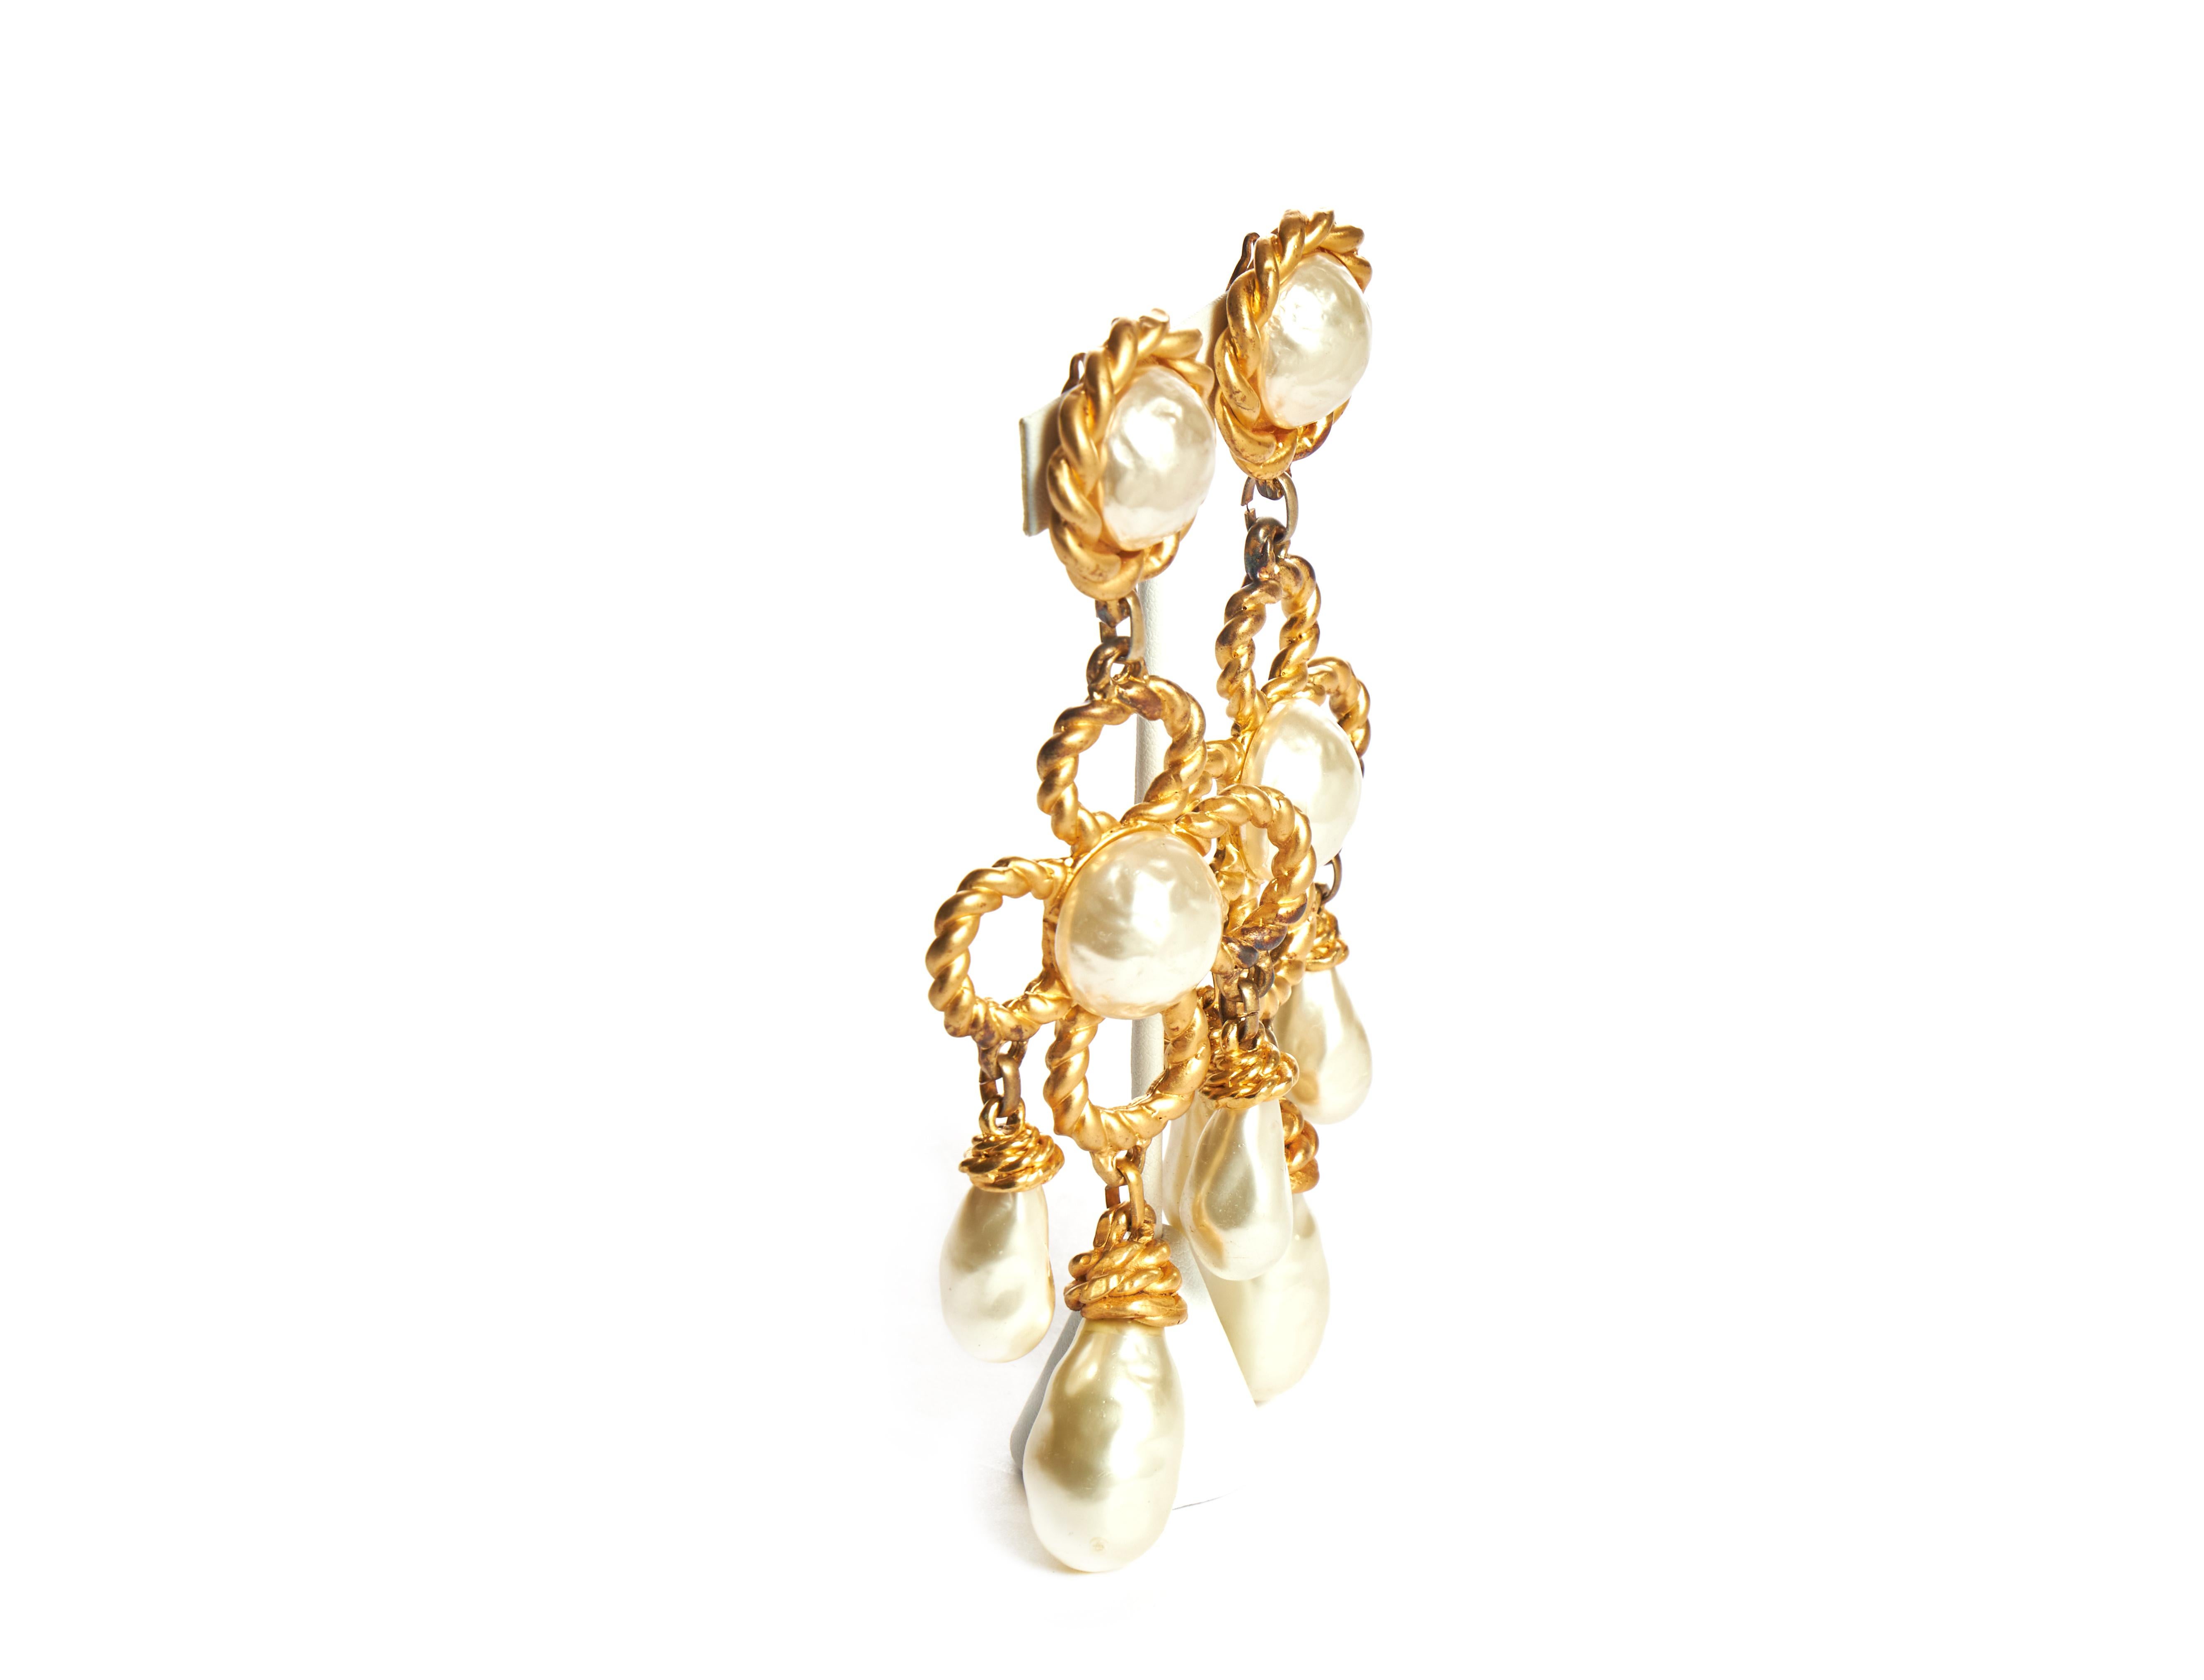 Chanel rare and collectible 70s oversized pearl drop earrings. Satin gold metal. Minor tarnish on gold. Mark S for sale back in the day. Comes with original box.